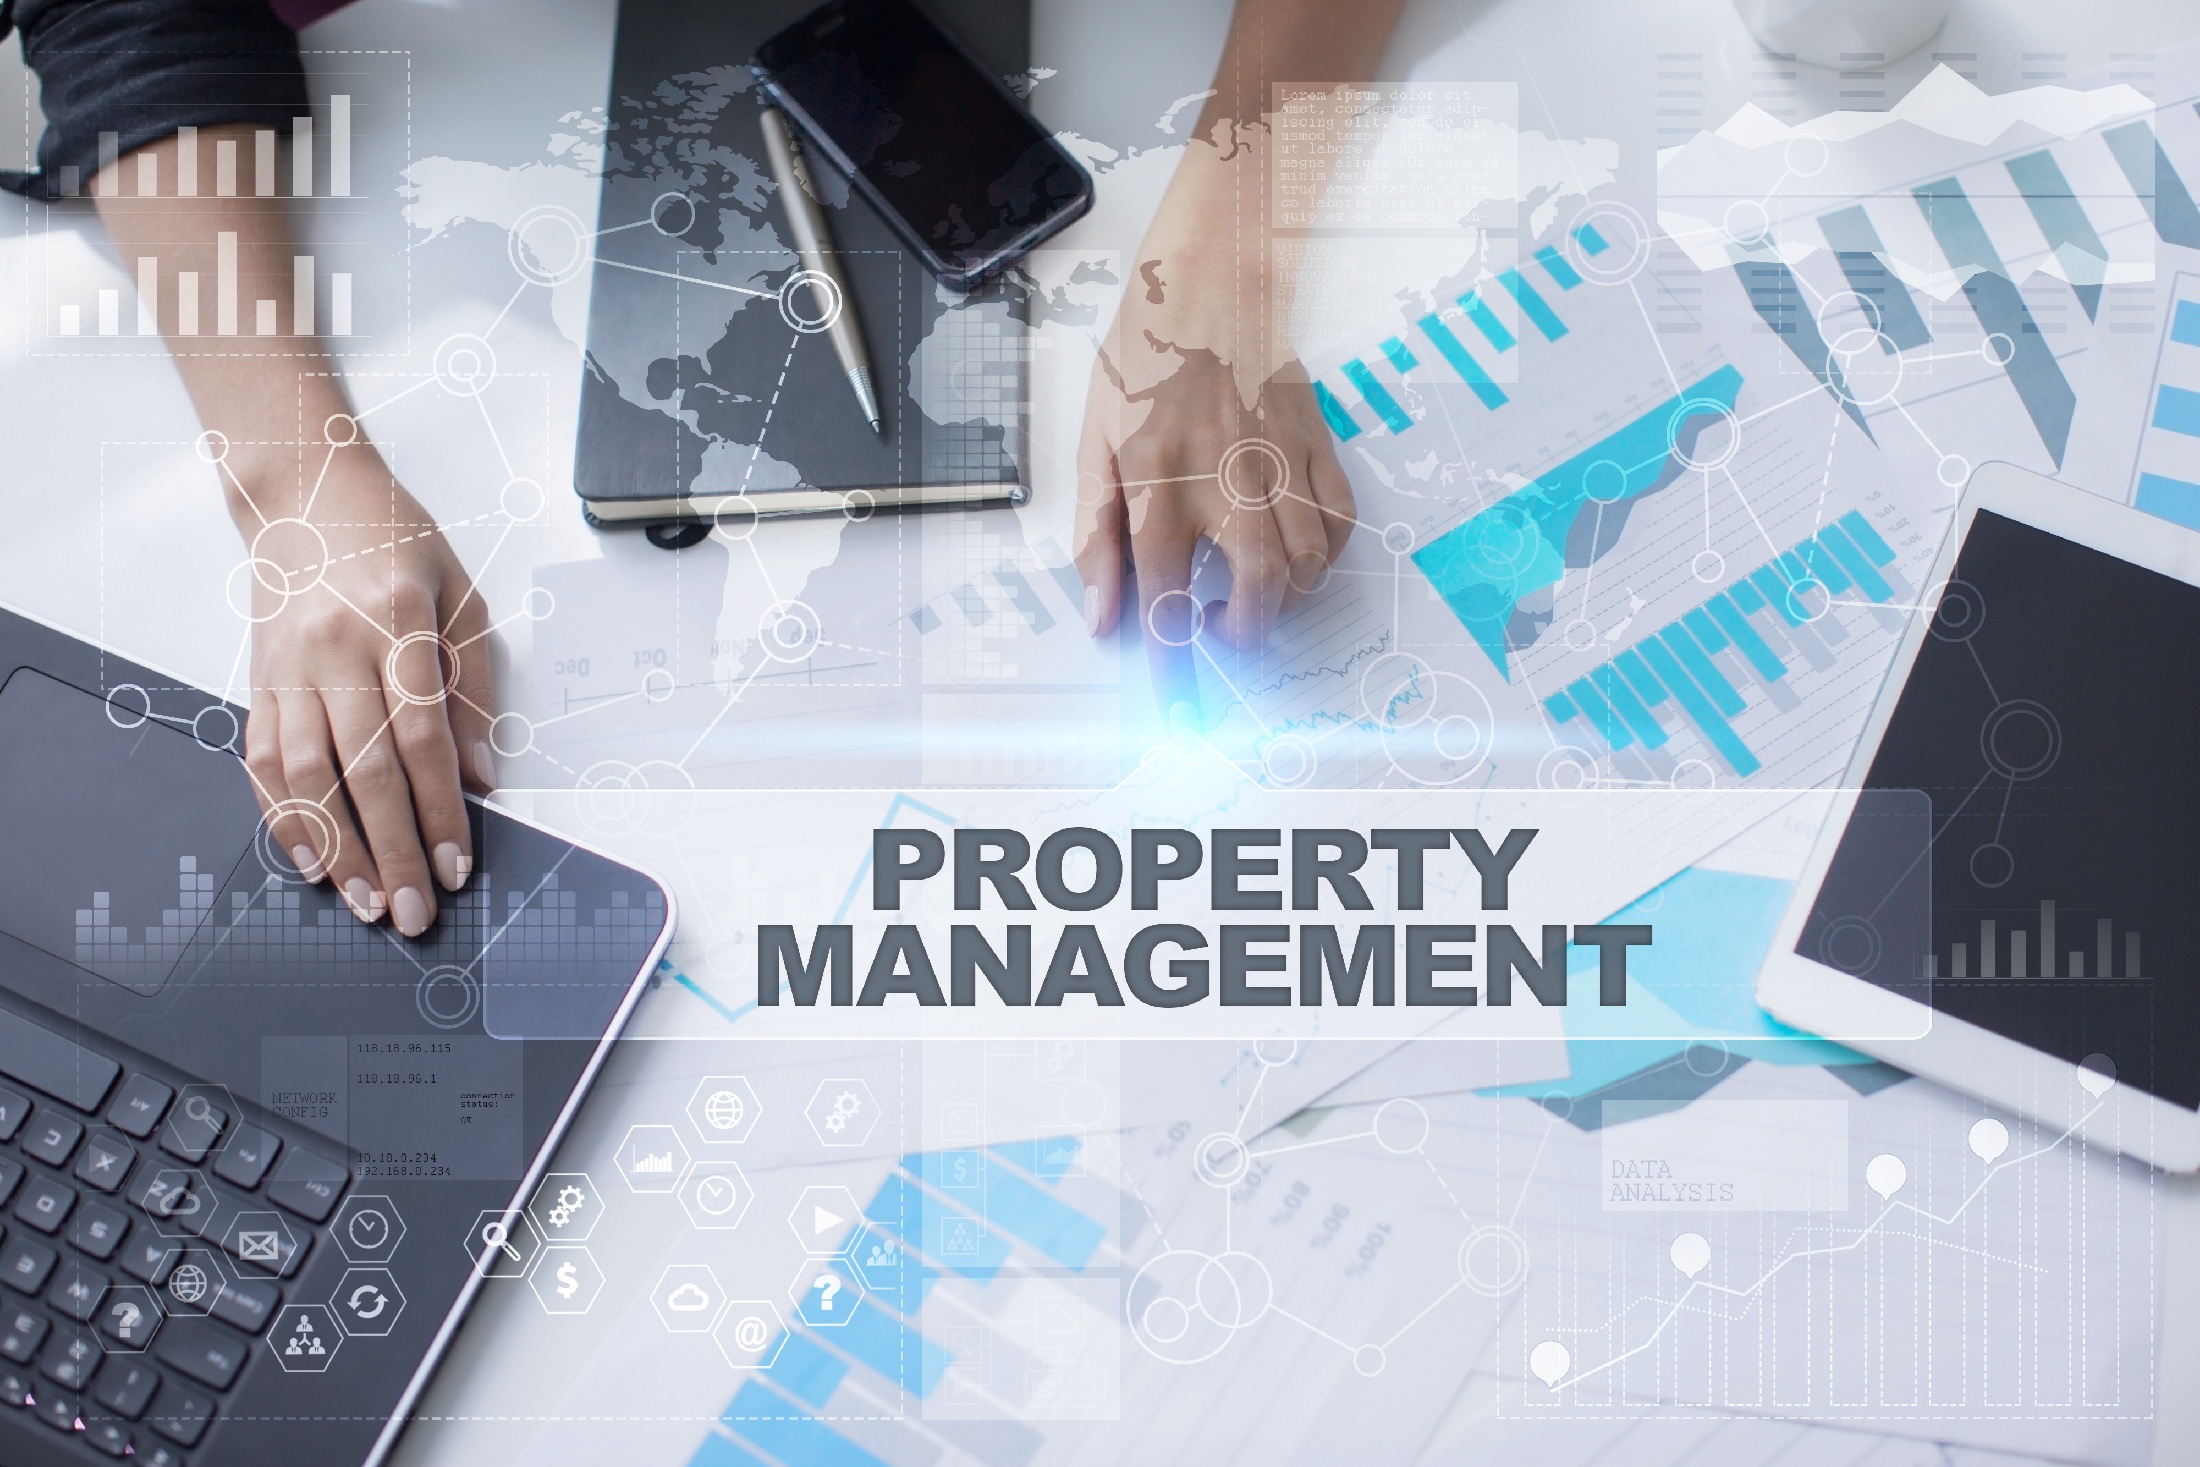 The 6 Best Property Management Software - 2021 Reviews